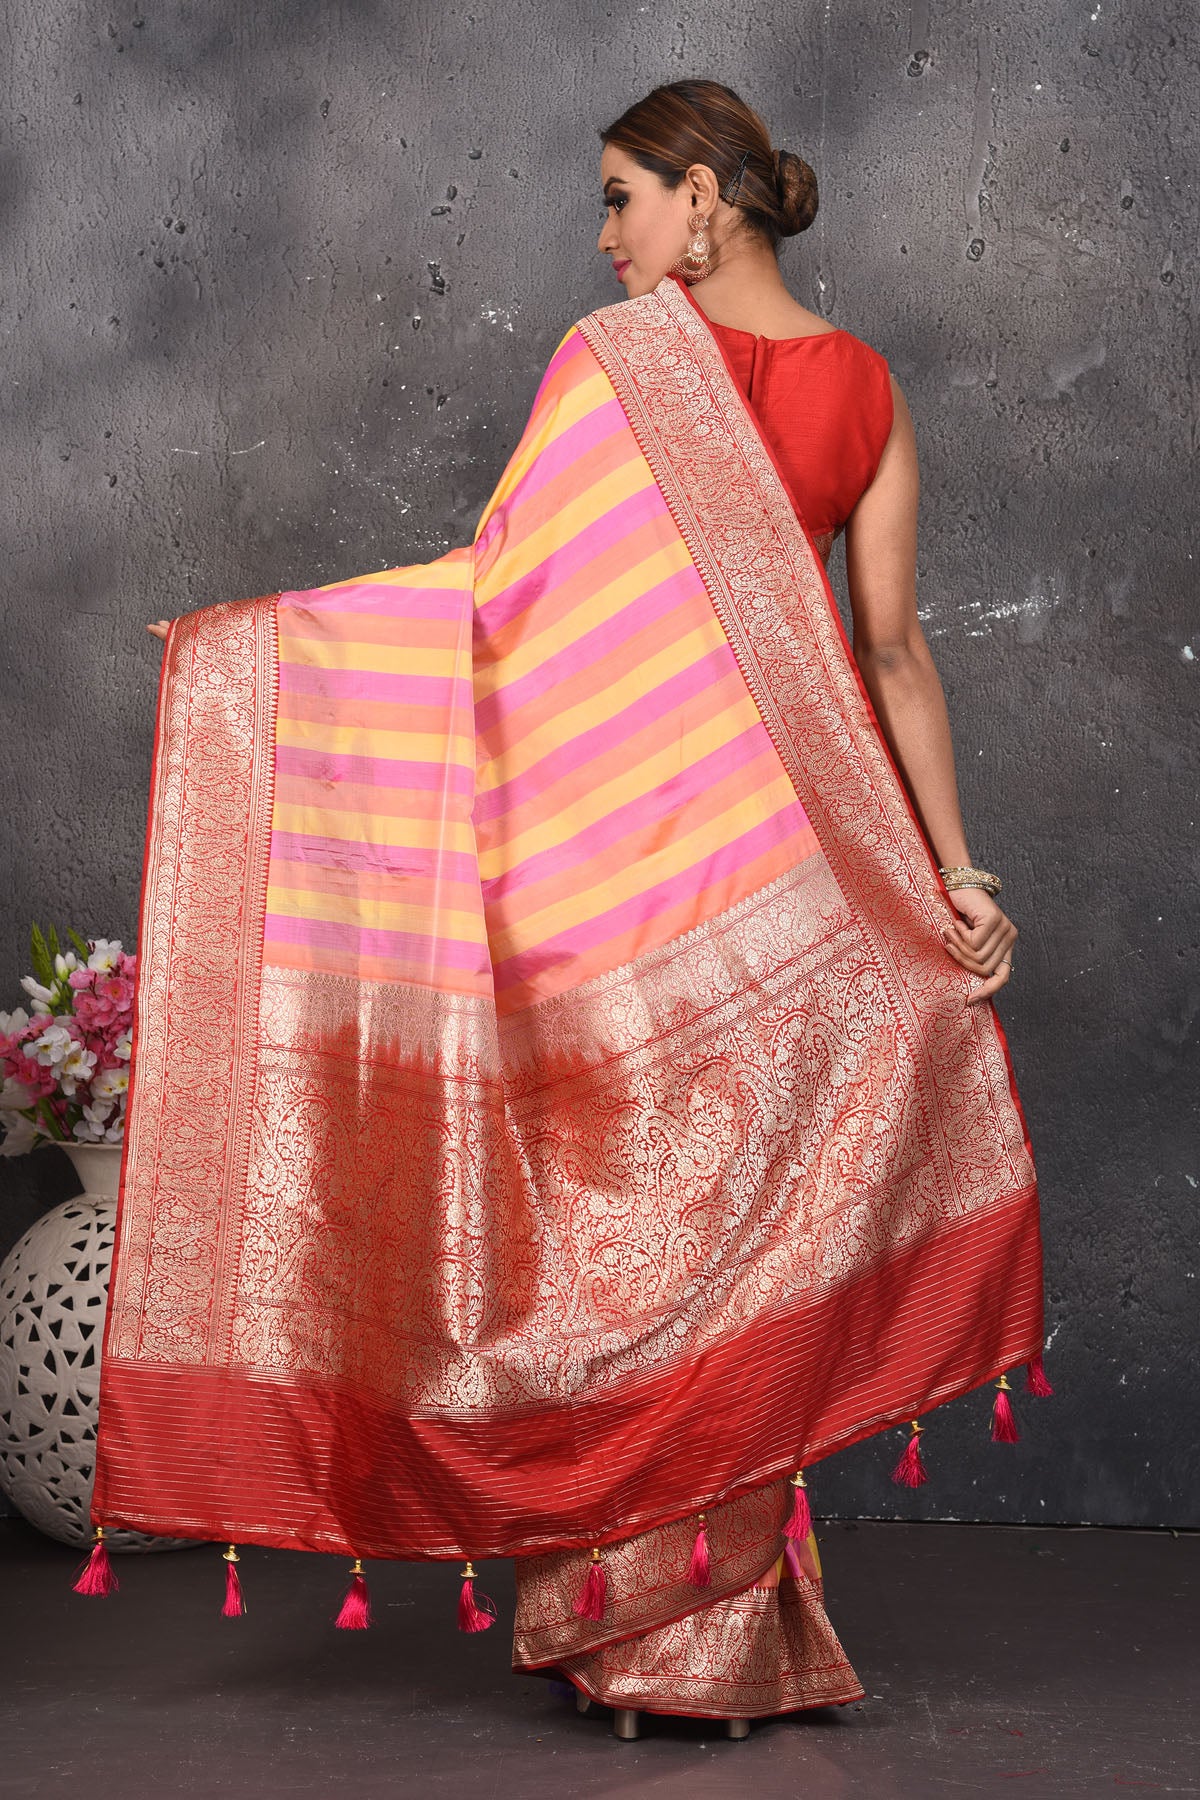 Buy this classy red banarasi silk brocade woven diagonal stripes and floral saree online in USA which has beautiful zari work all over the heavy border and end with handmade latkan. Pair this royal banarasi handloom brocade woven saree with your designer blouse and a potli bag from Pure Elegance Indian fashion store in USA.- Back view with open pallu.